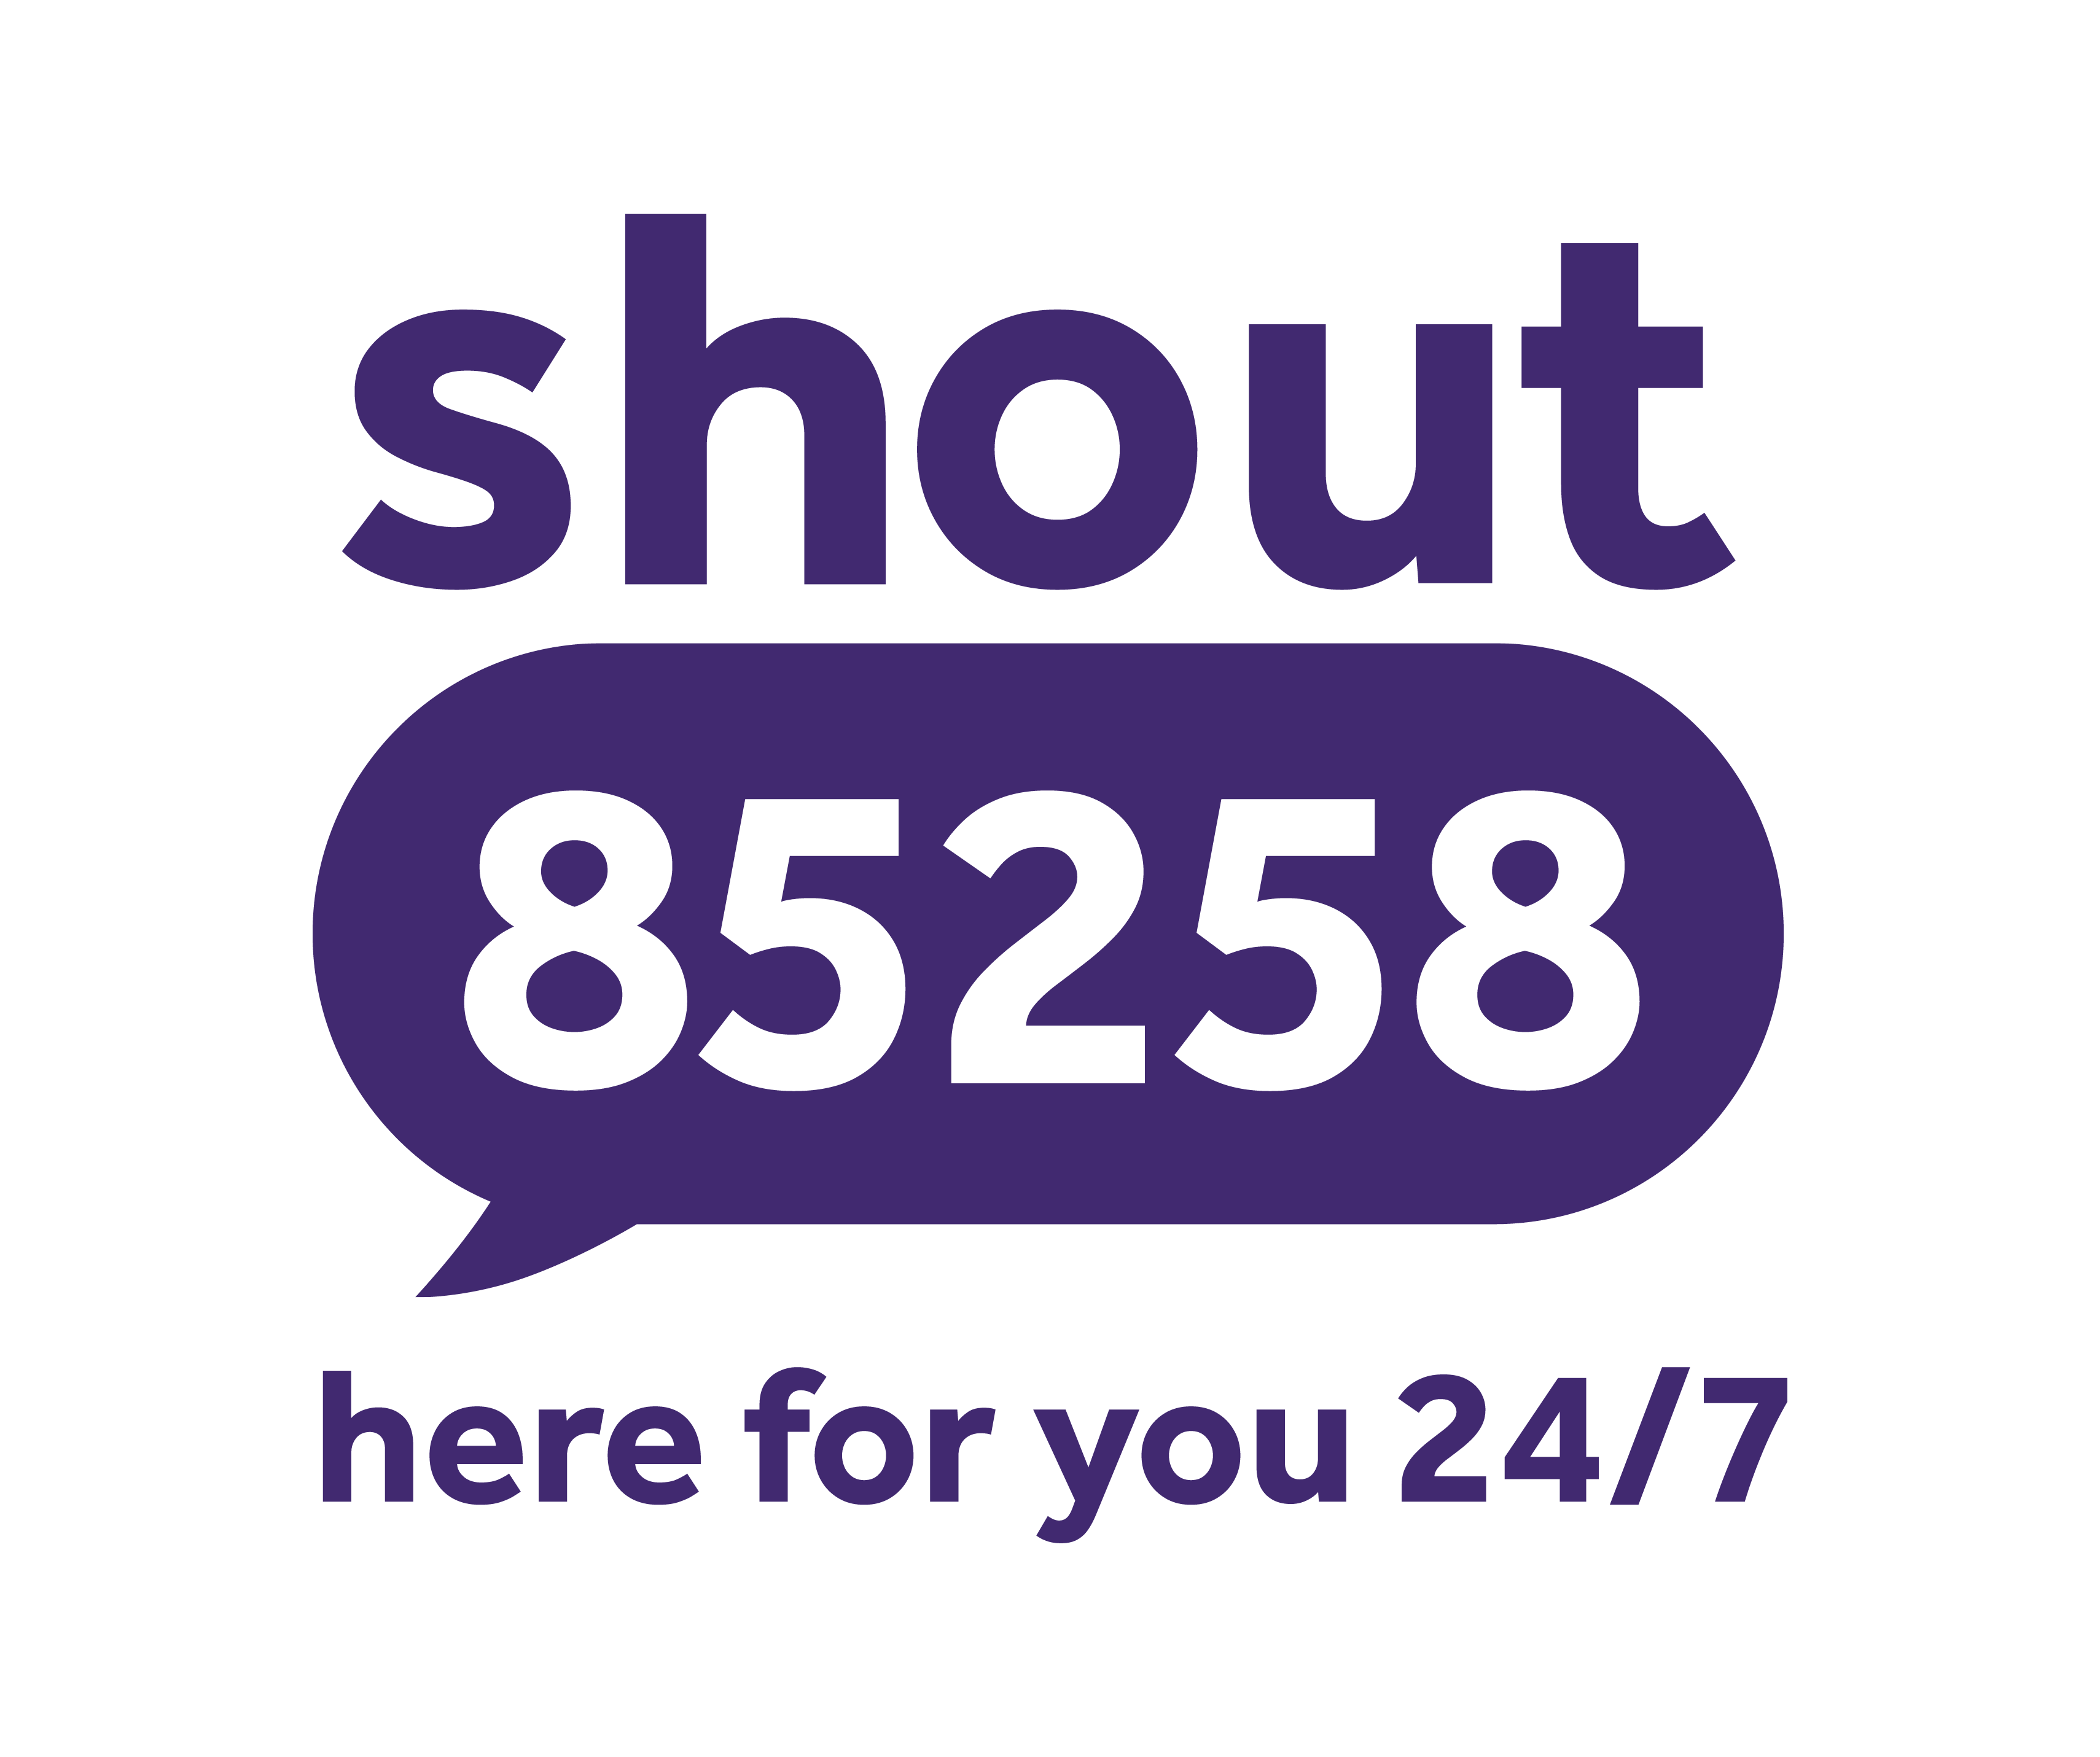 Share the number | Shout 85258